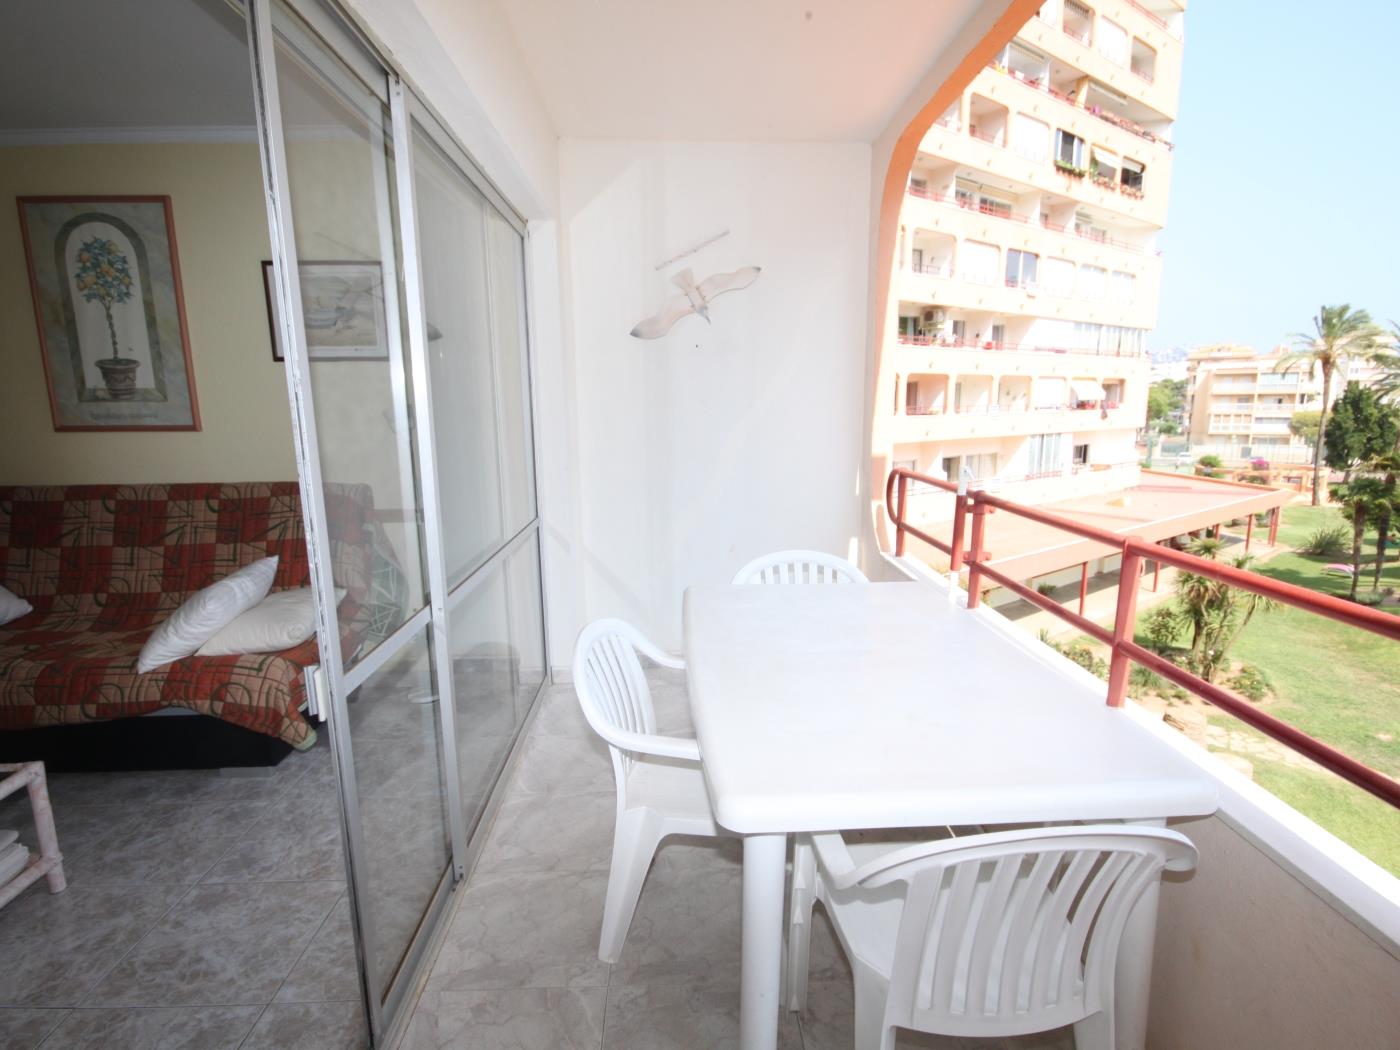 1 Bedroom apartment with sea view and pool in ROSES